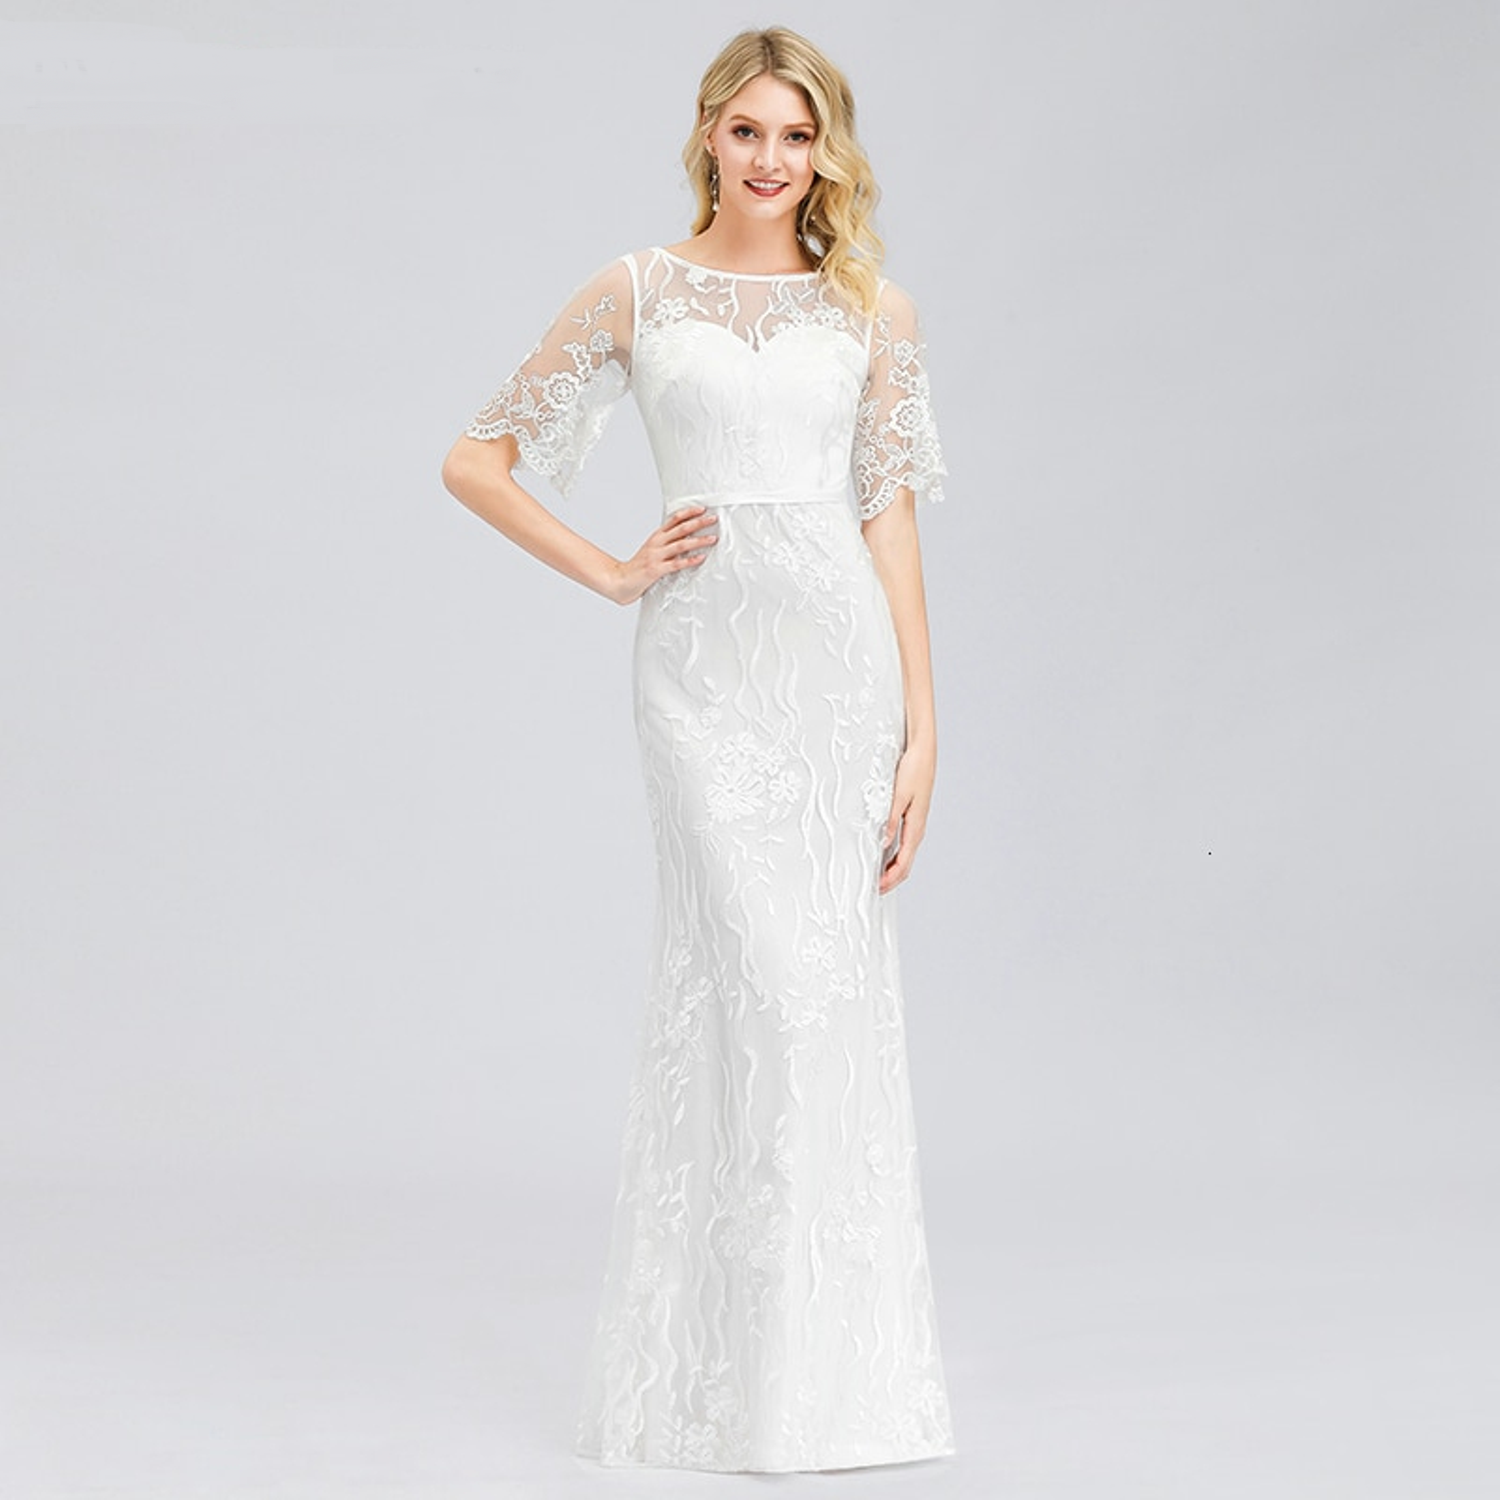 Mermaid wedding gown with flutter sleeves